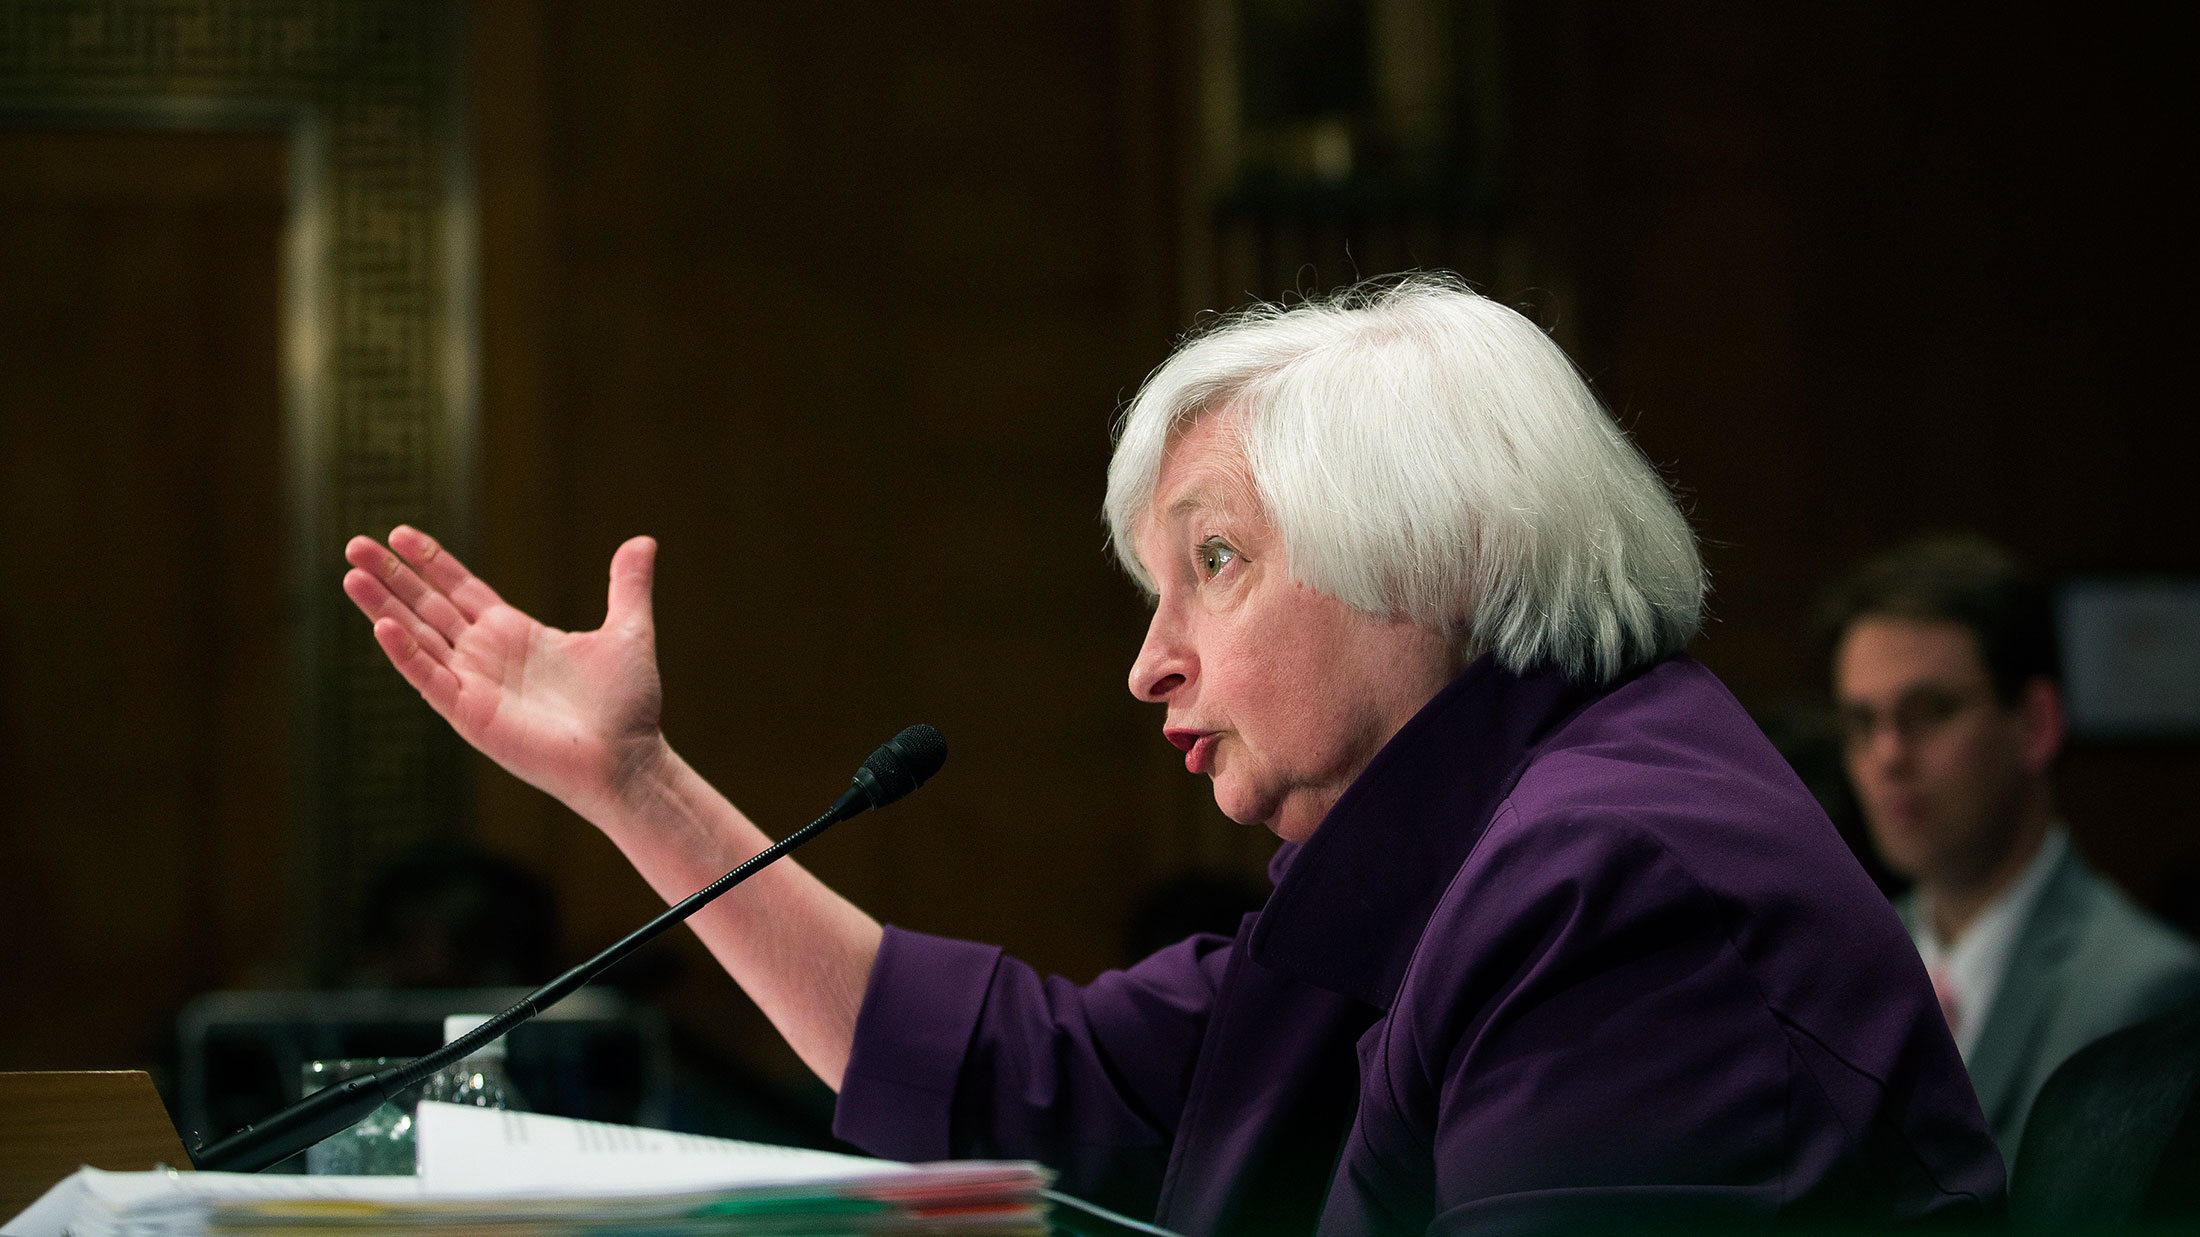 Janet Yellen, chair of the U.S. Federal Reserve, speaks during her semiannual report on the economy to the Senate Banking Committee in Washington, D.C. on July 16, 2015.
